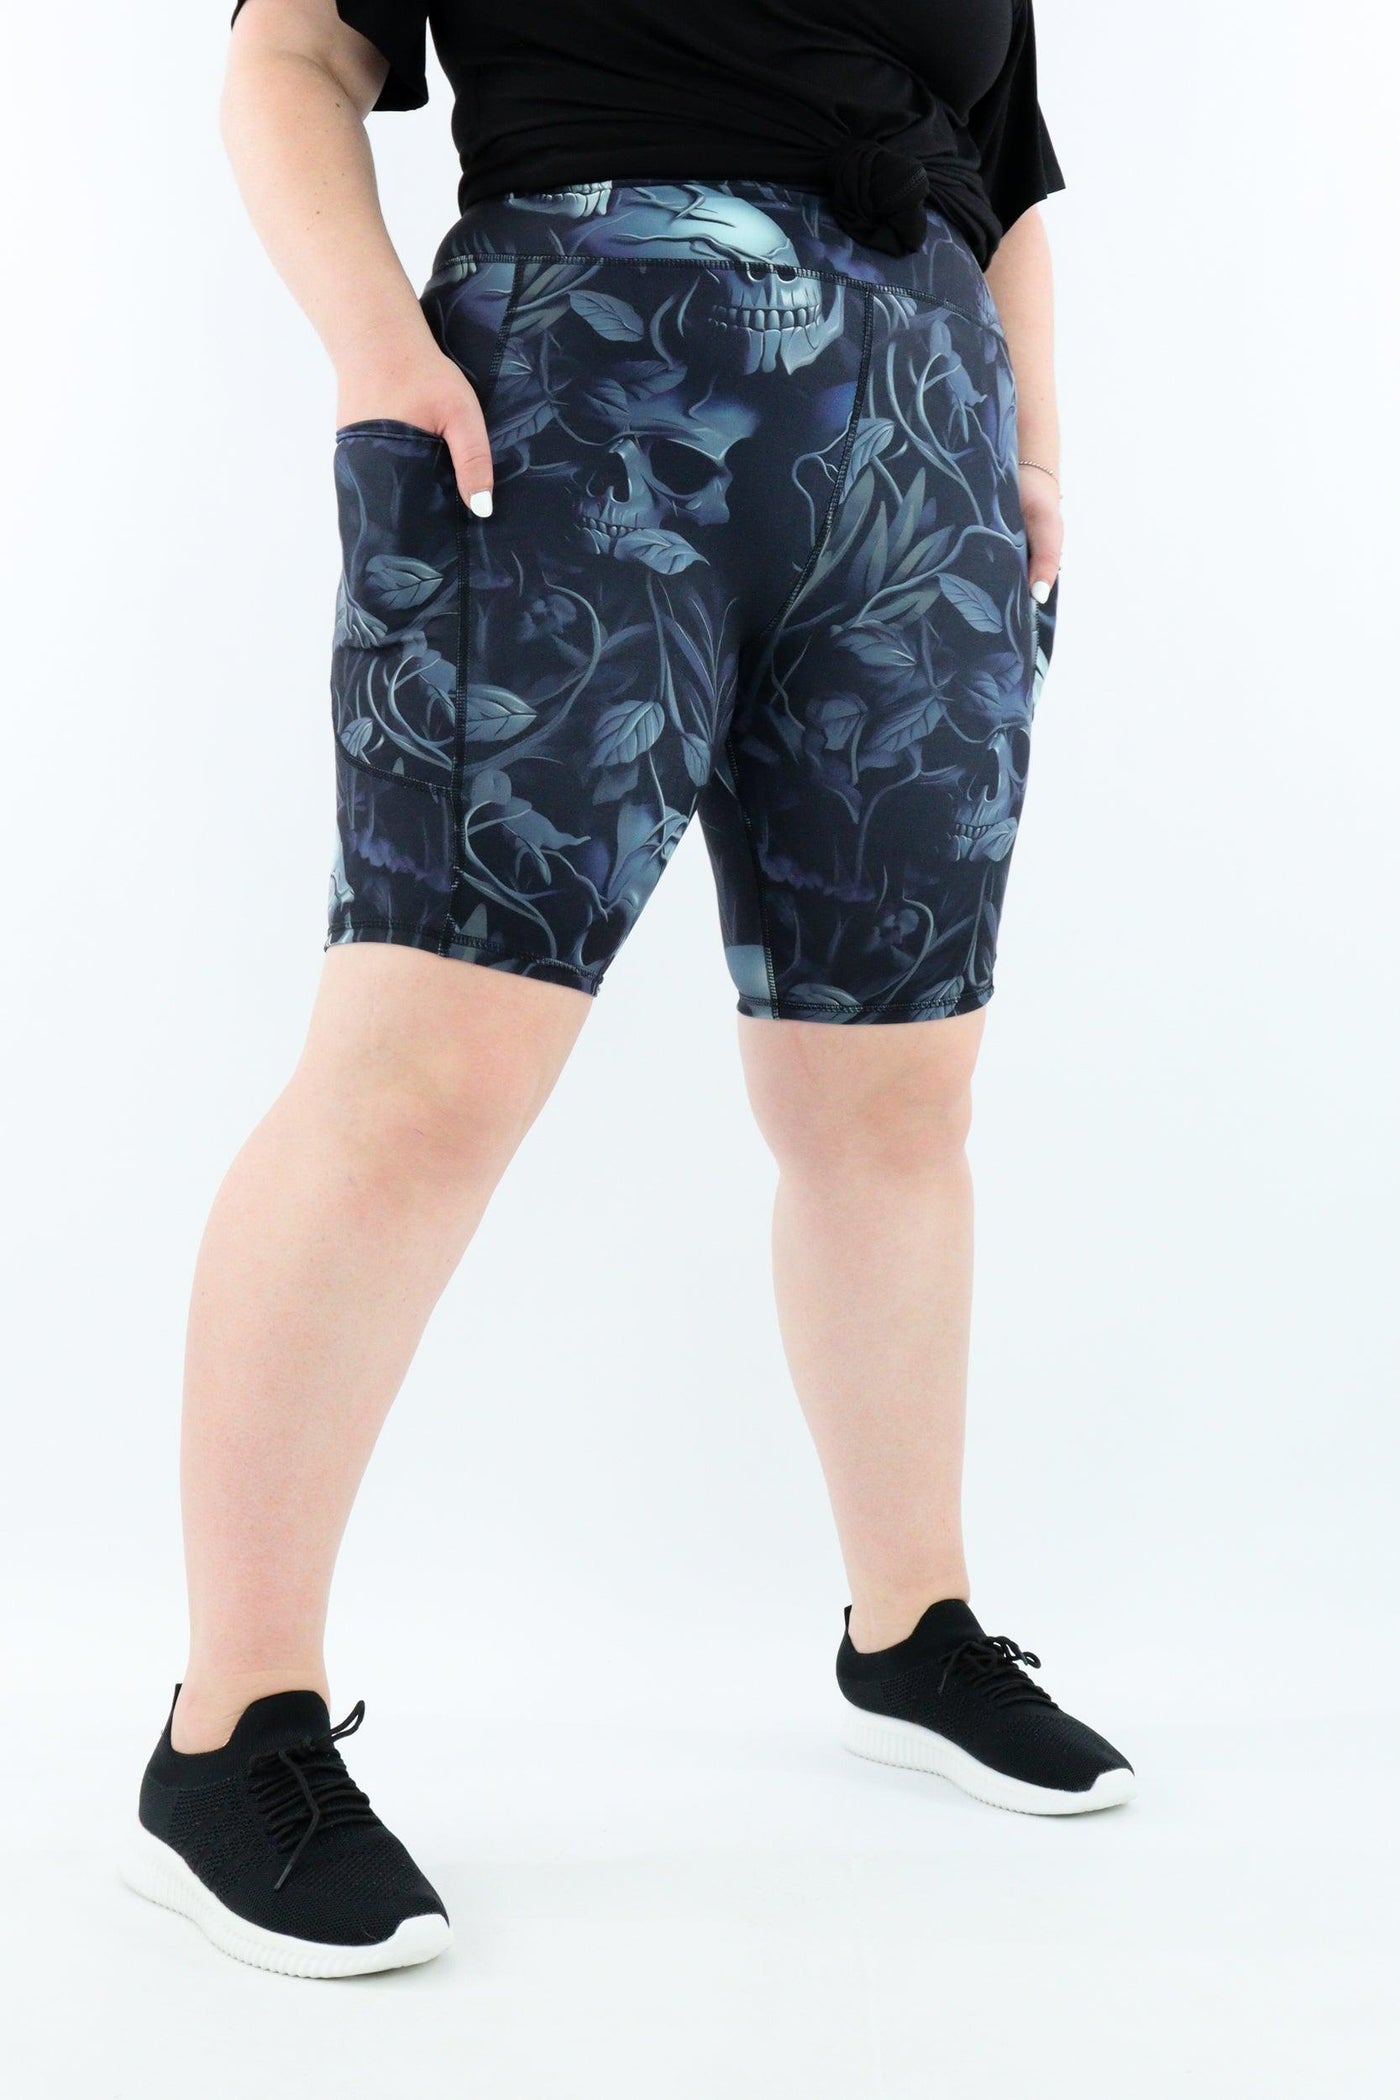 Vines of the Dead - Casual - Long Shorts - Pockets - Pawlie